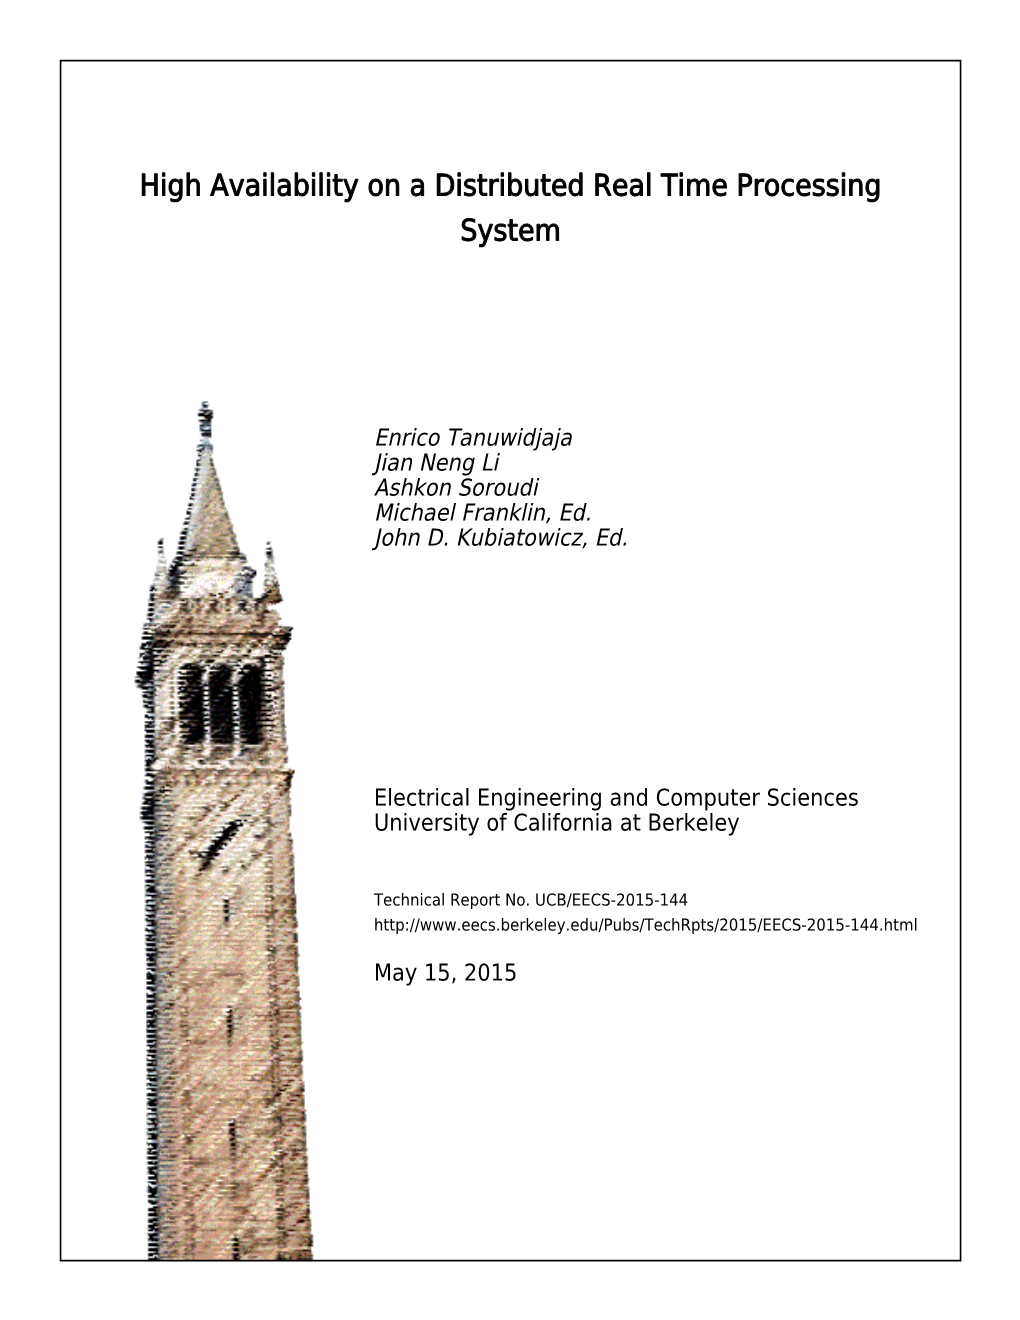 High Availability on a Distributed Real Time Processing System